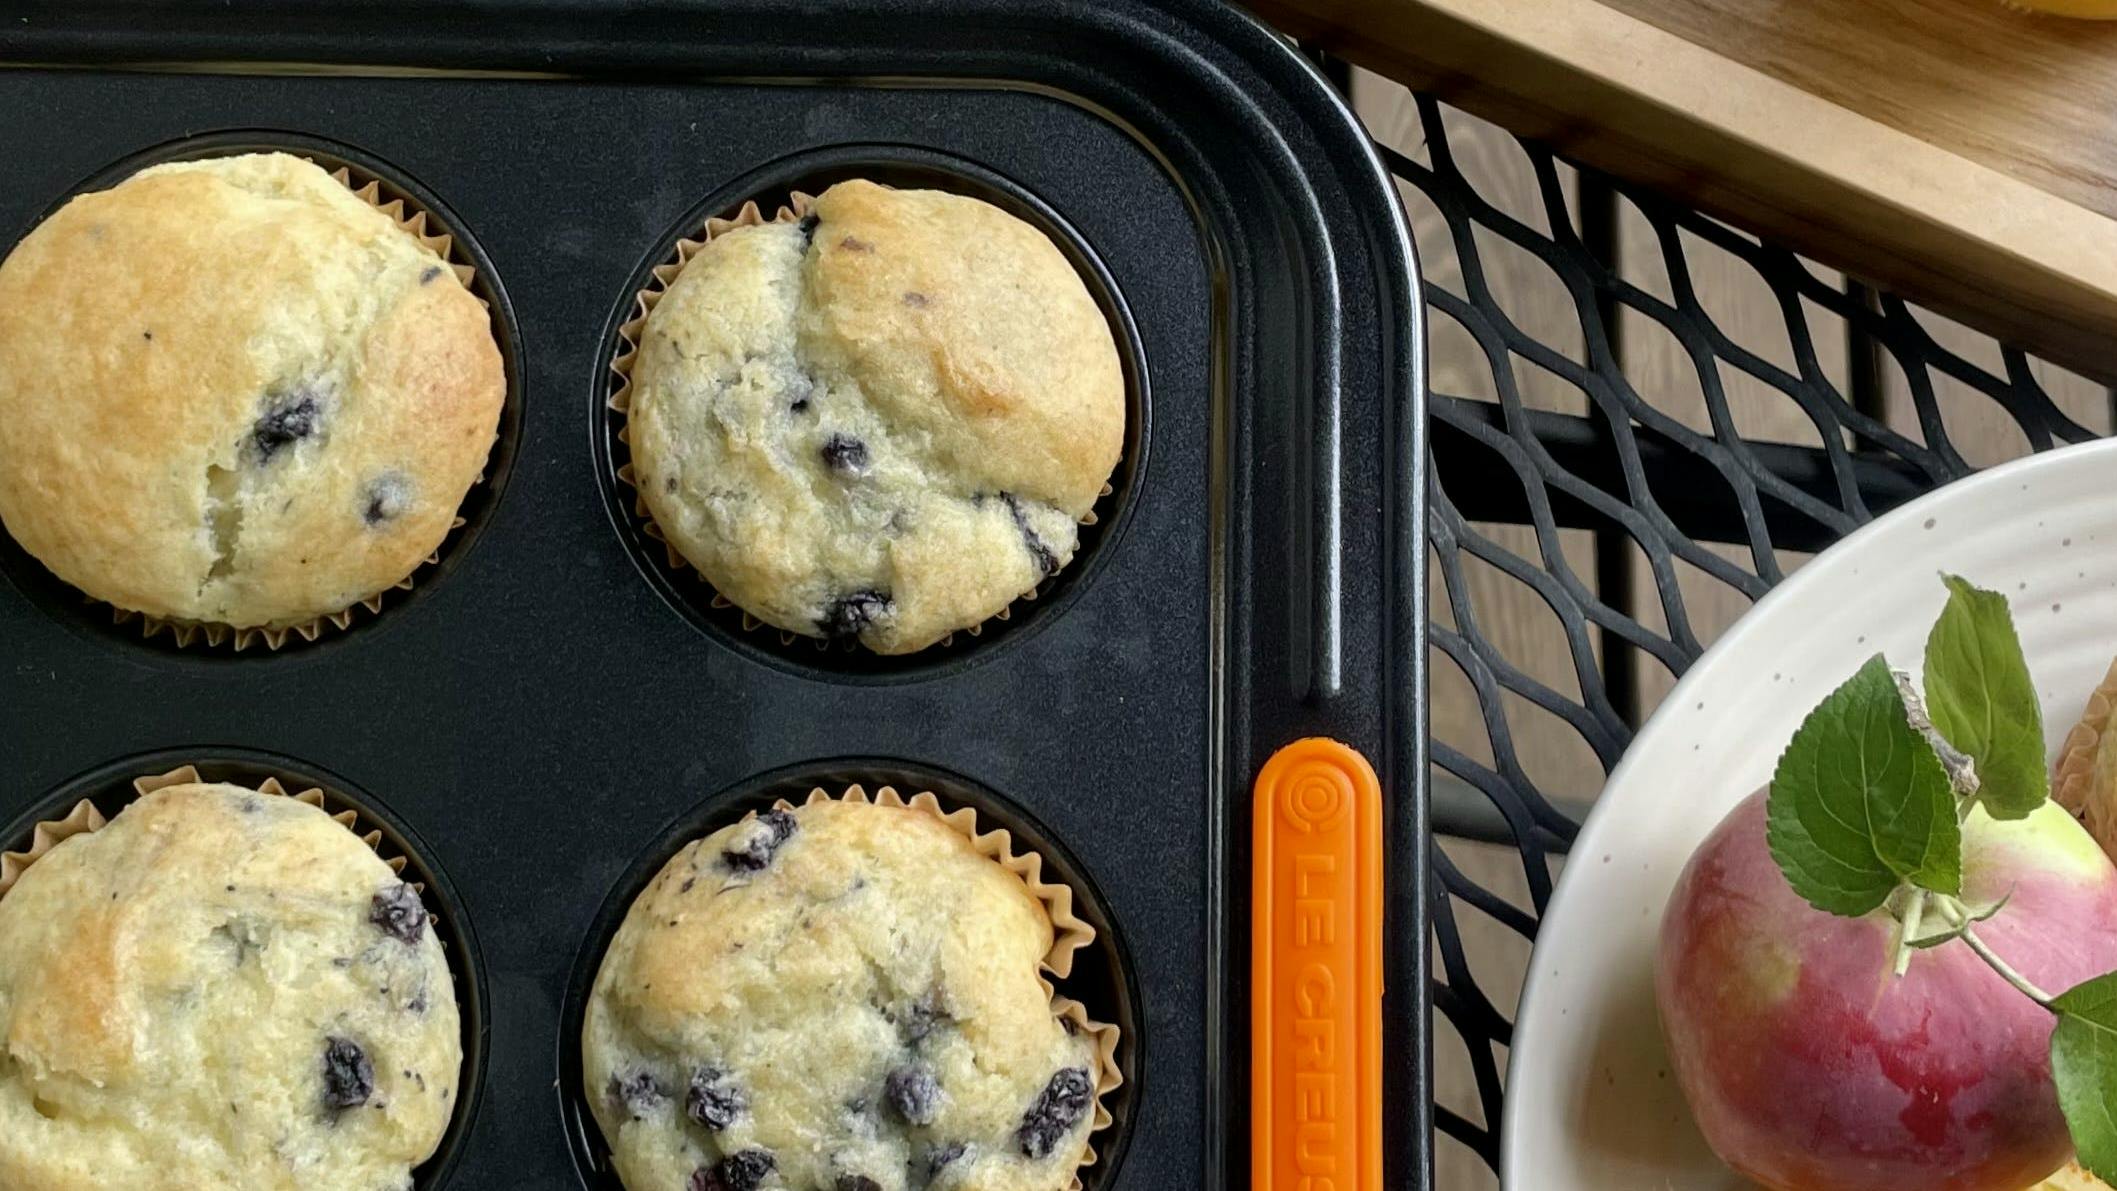 Blueberry muffins in Le Creuset nonstick muffin pan.